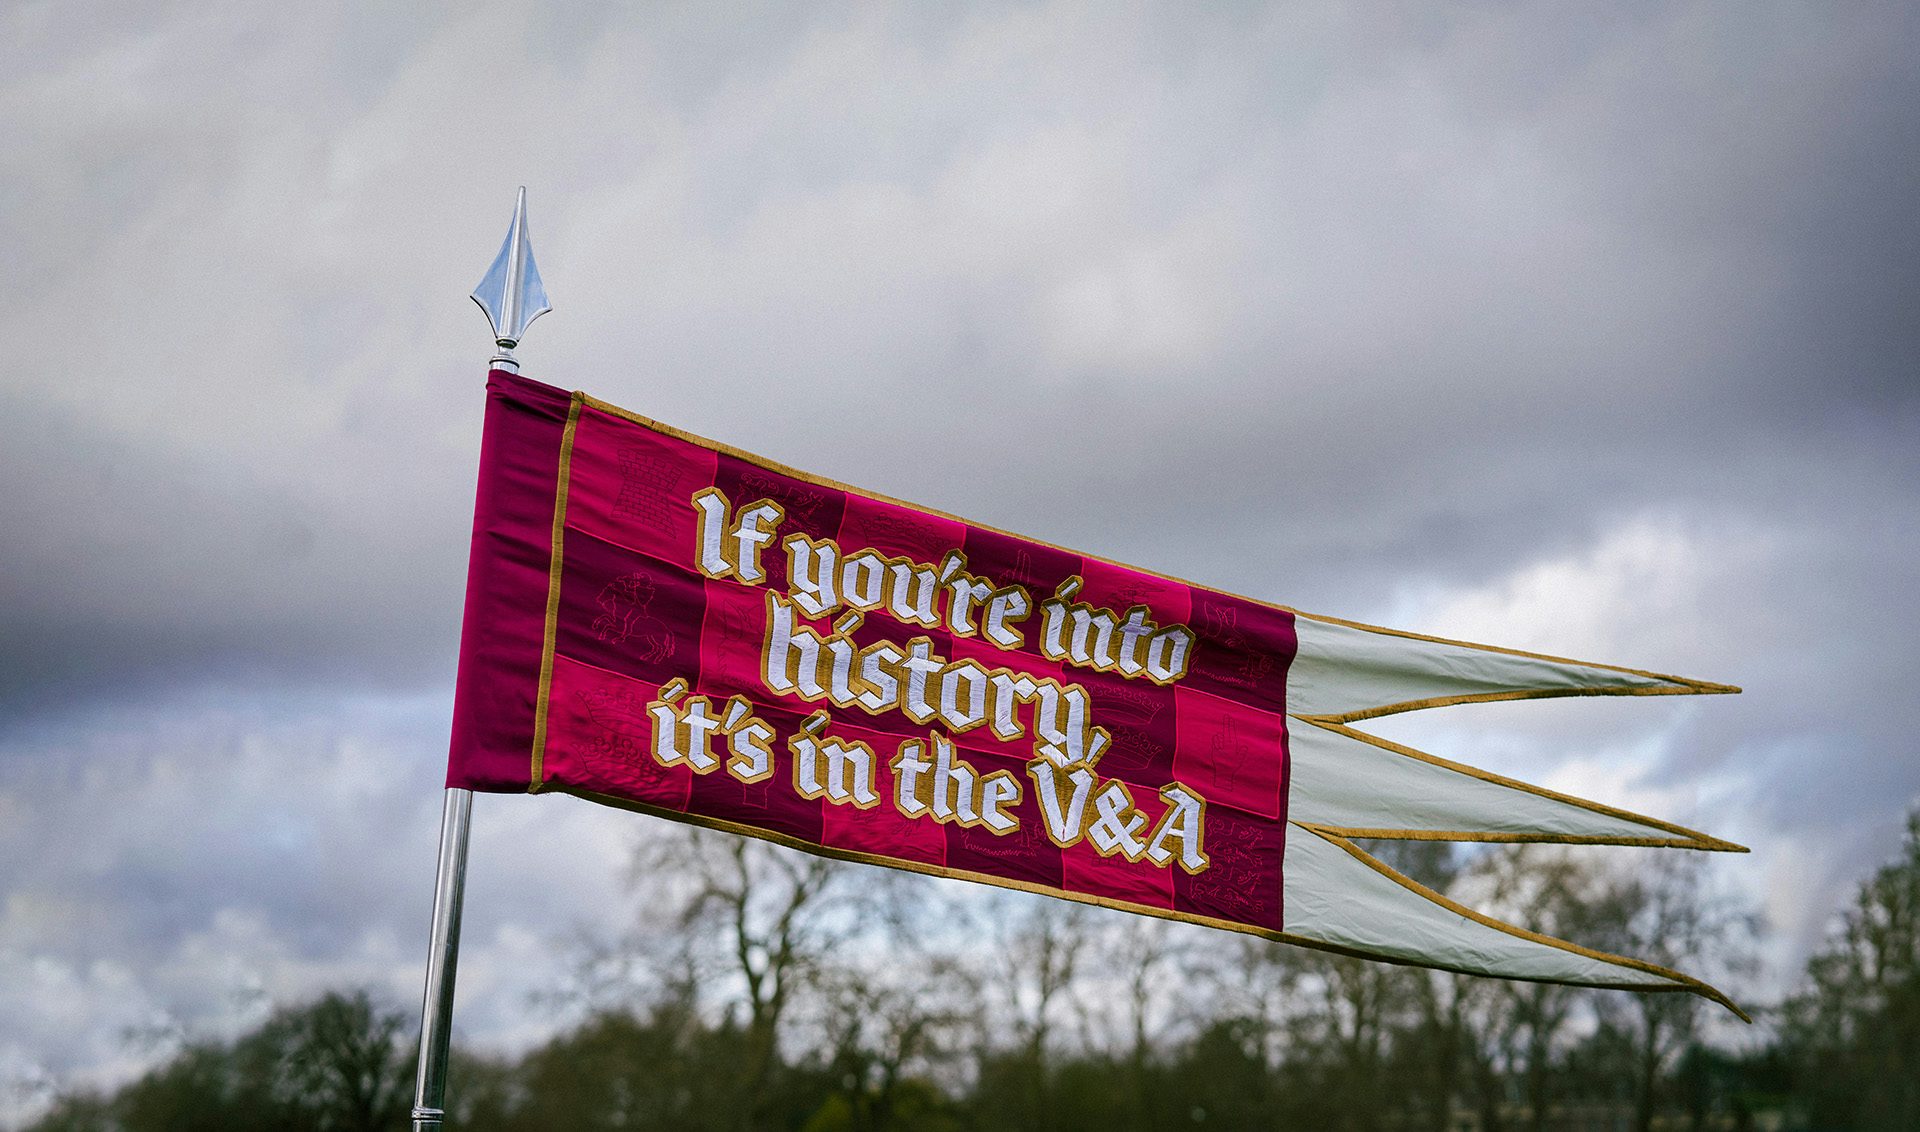 Image showing the V&A campaign slogan 'if you're into it, it's in the V&A' written on a red medieval flag